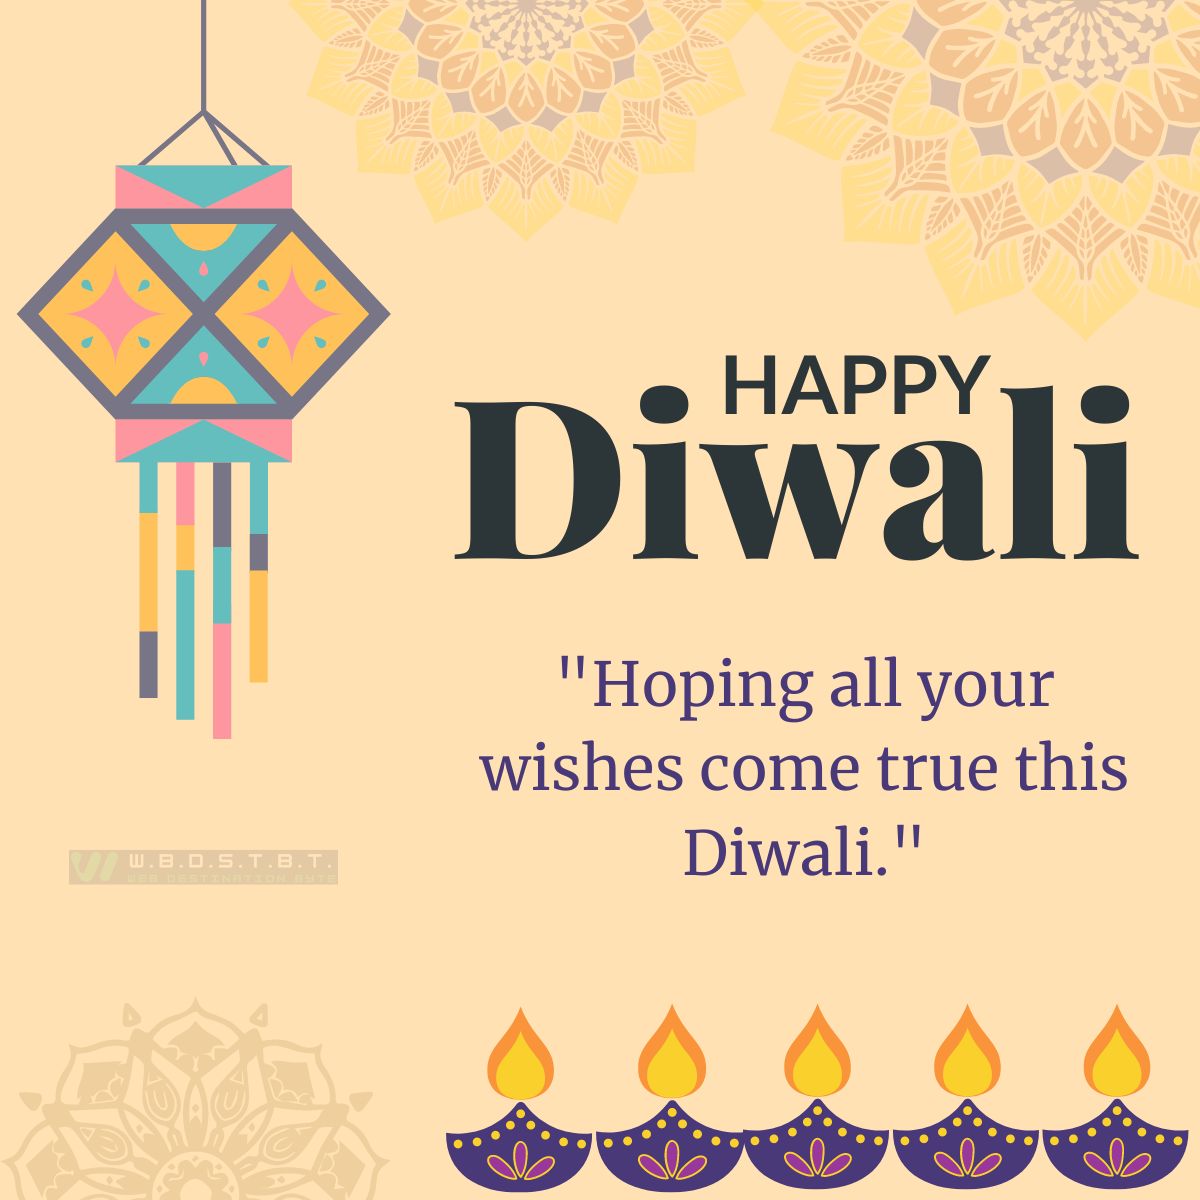 "Hoping all your wishes come true this Diwali."